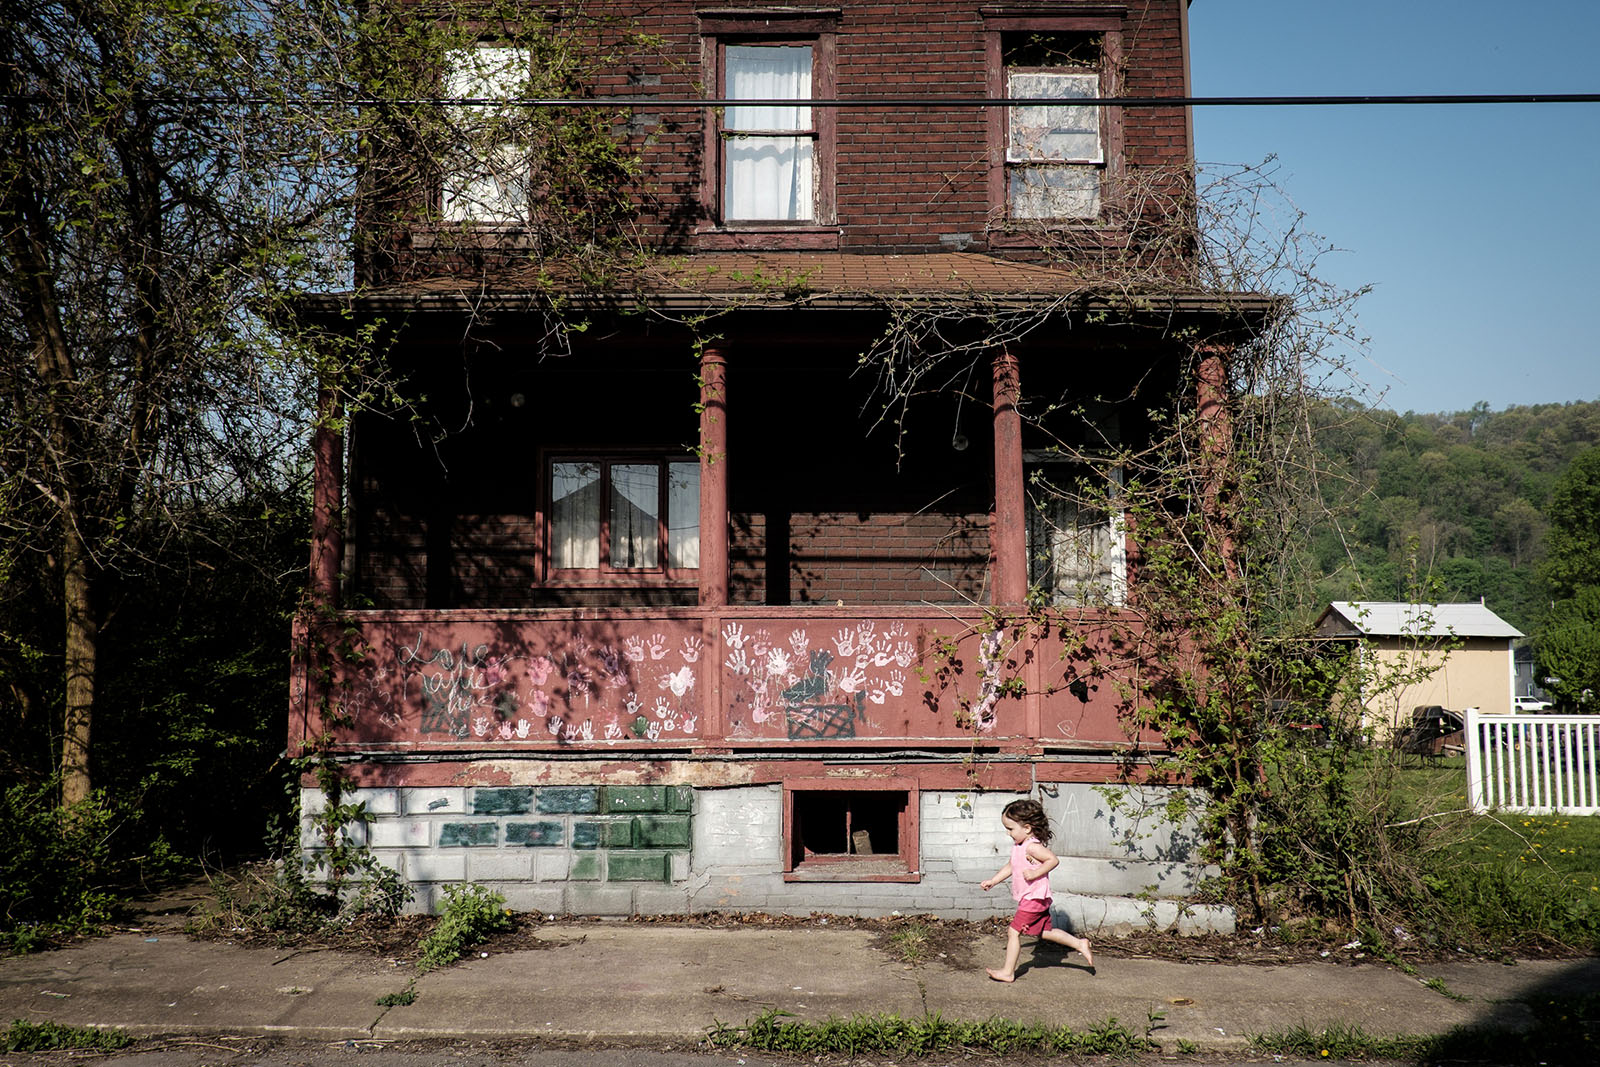 A young girl runs by a decrepit, abandoned house.